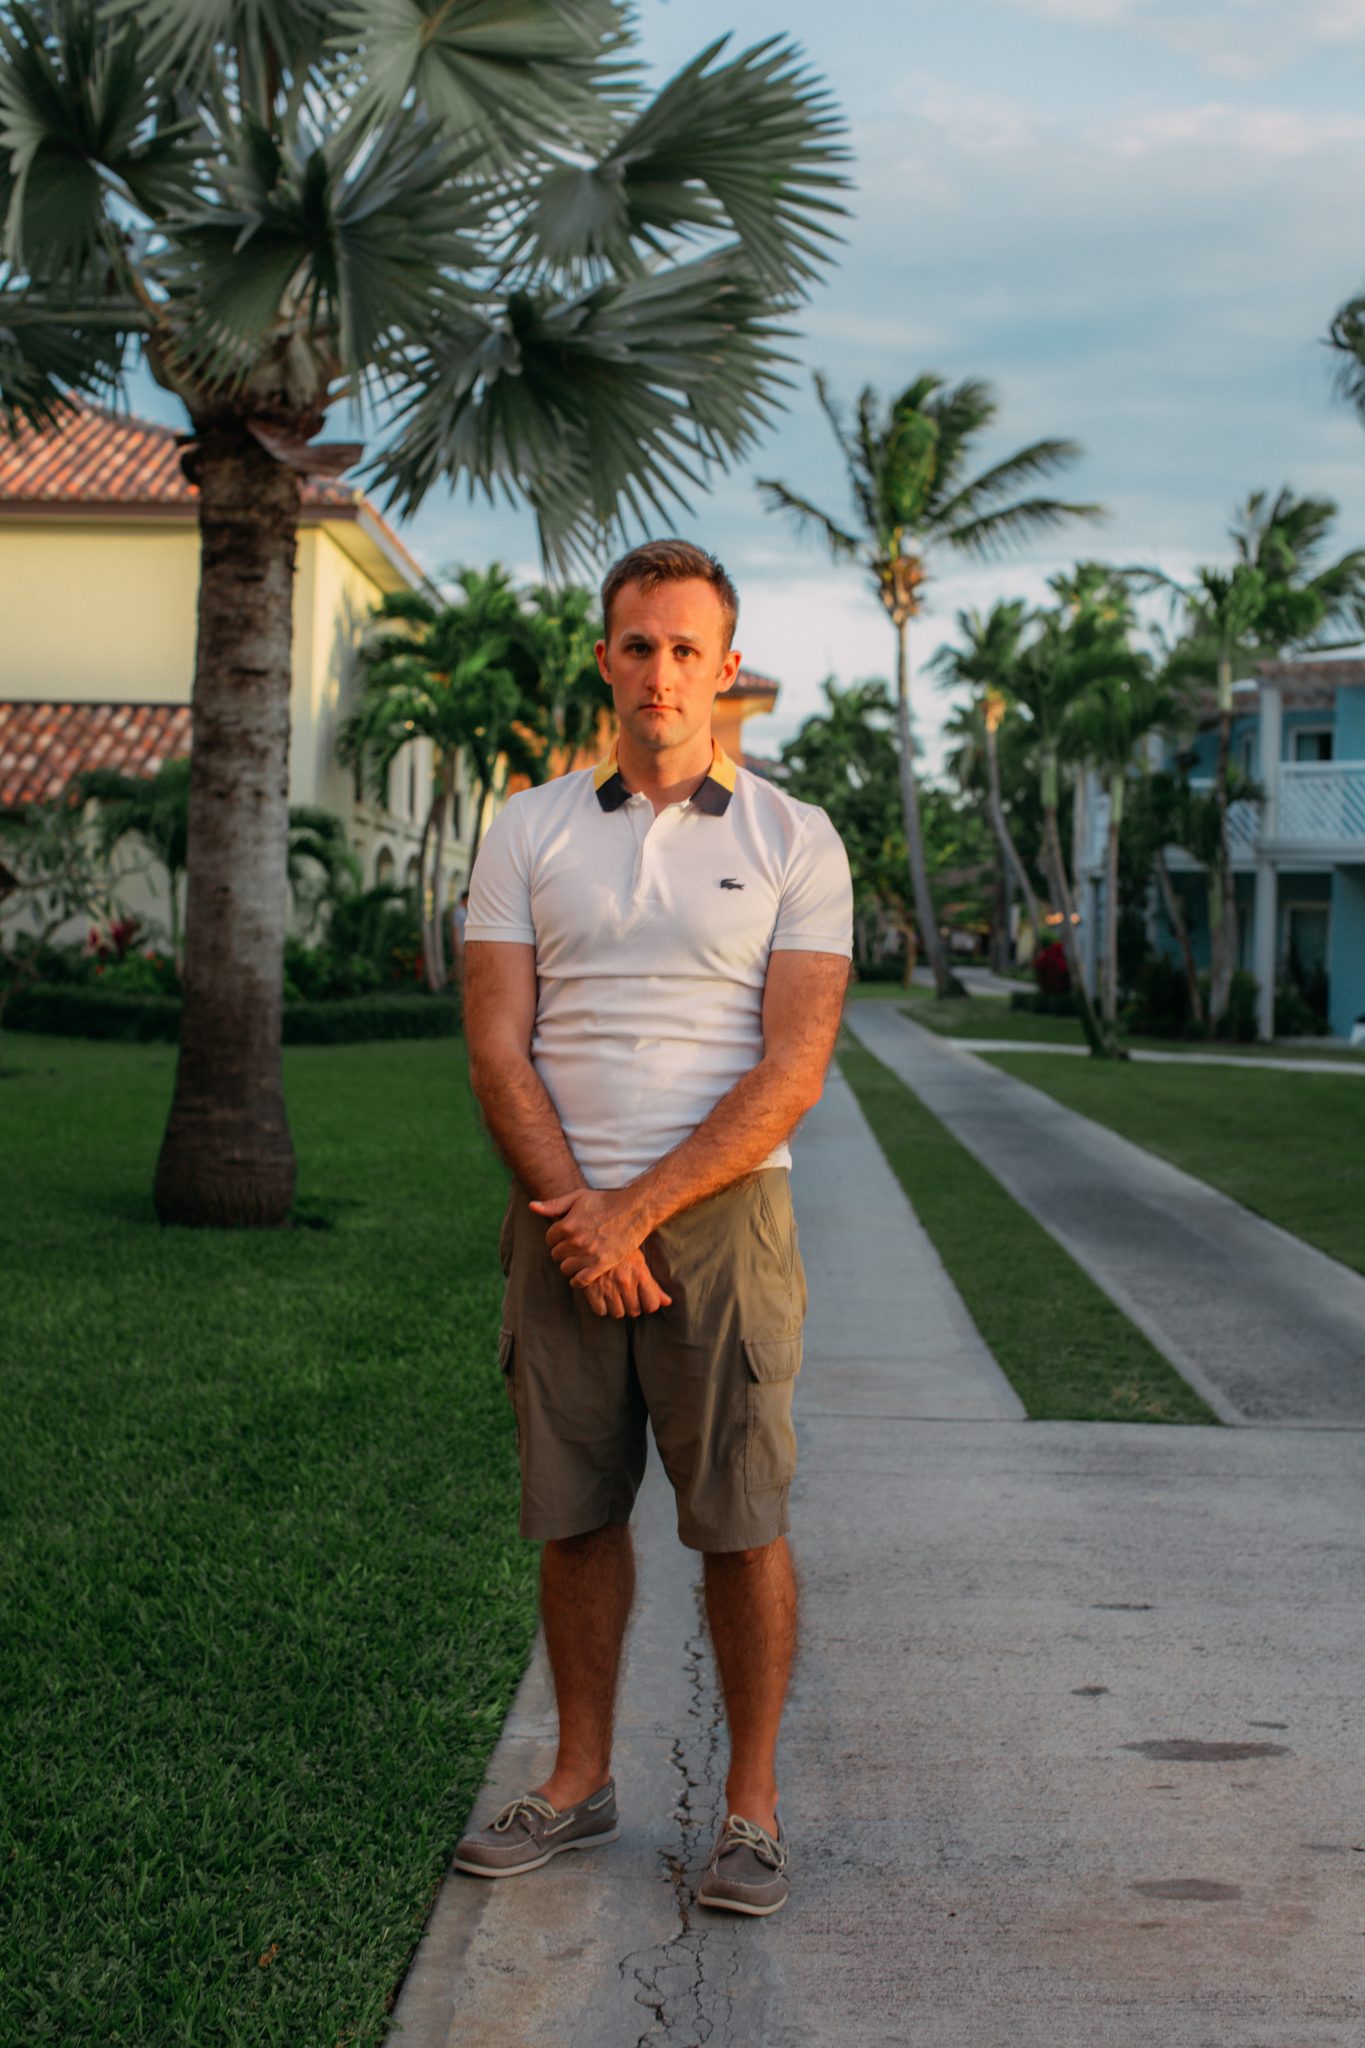 A man standing on a sidewalk in front of palm trees.